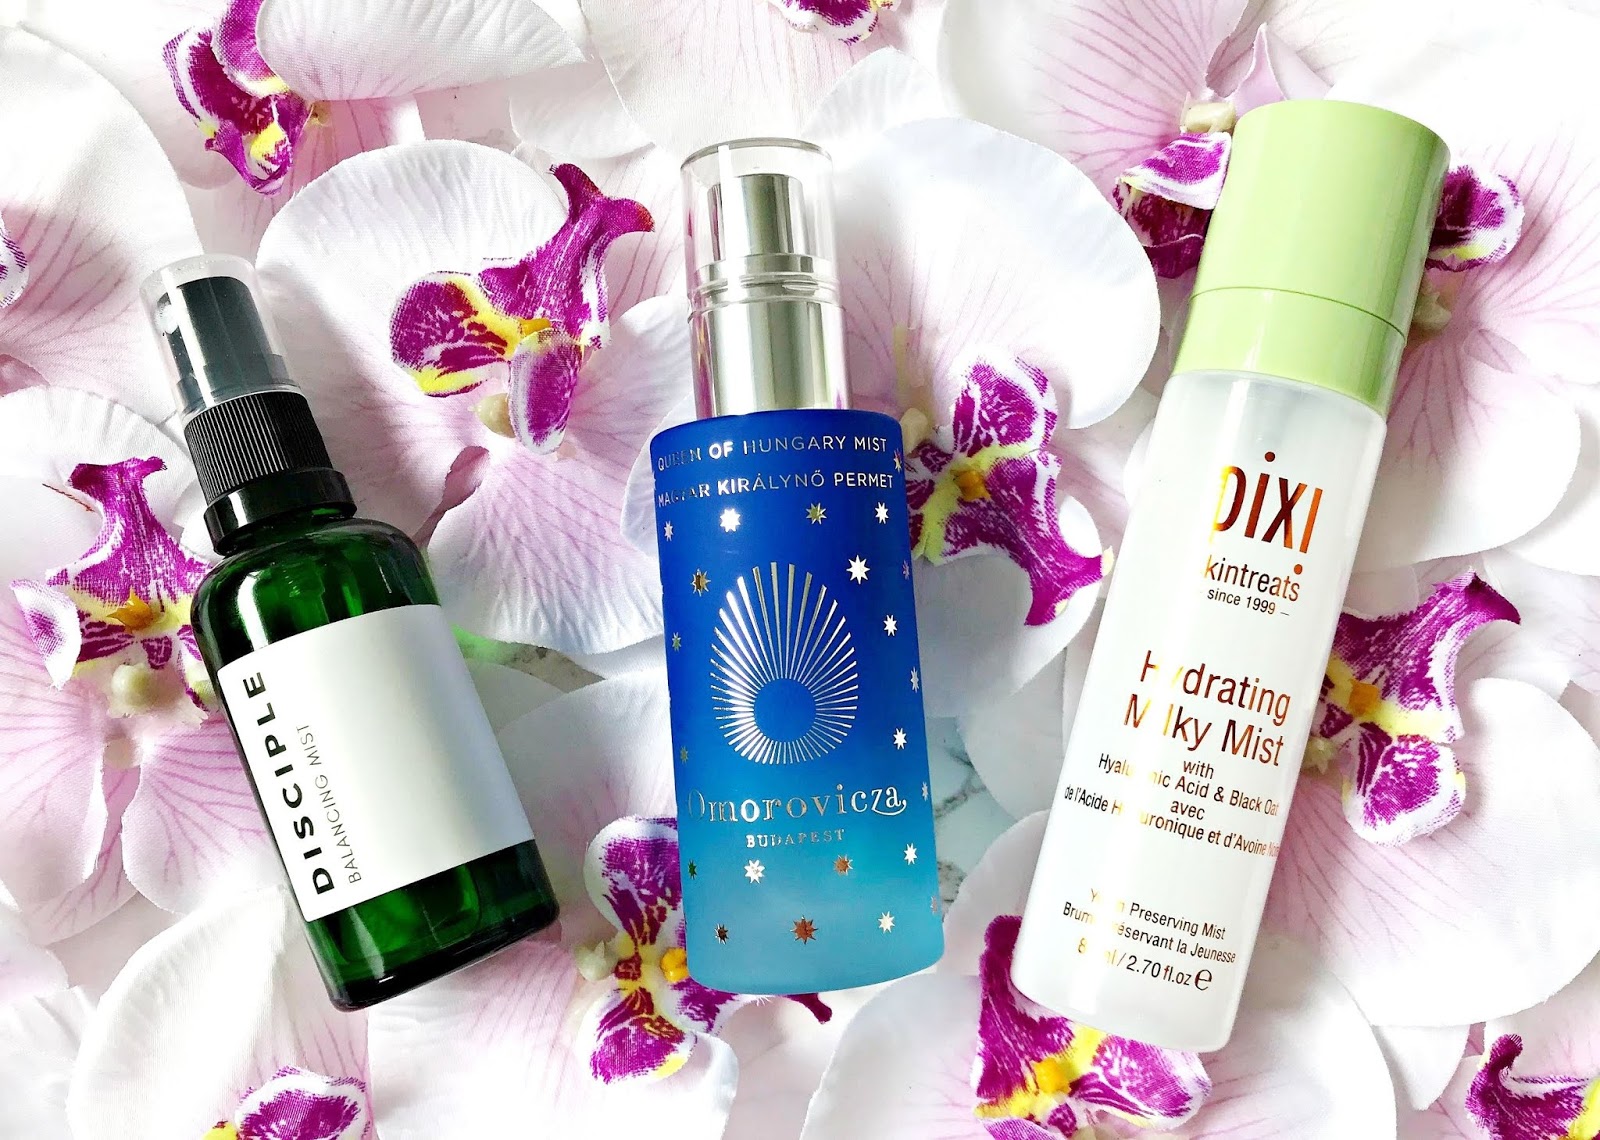 Pixi, Hydrating Milky Mist Review, Omorovicza, Queen of Hungary Mist Review, Disciple Balancing Mist Review, Face Mist, Facial Mist, Skincare